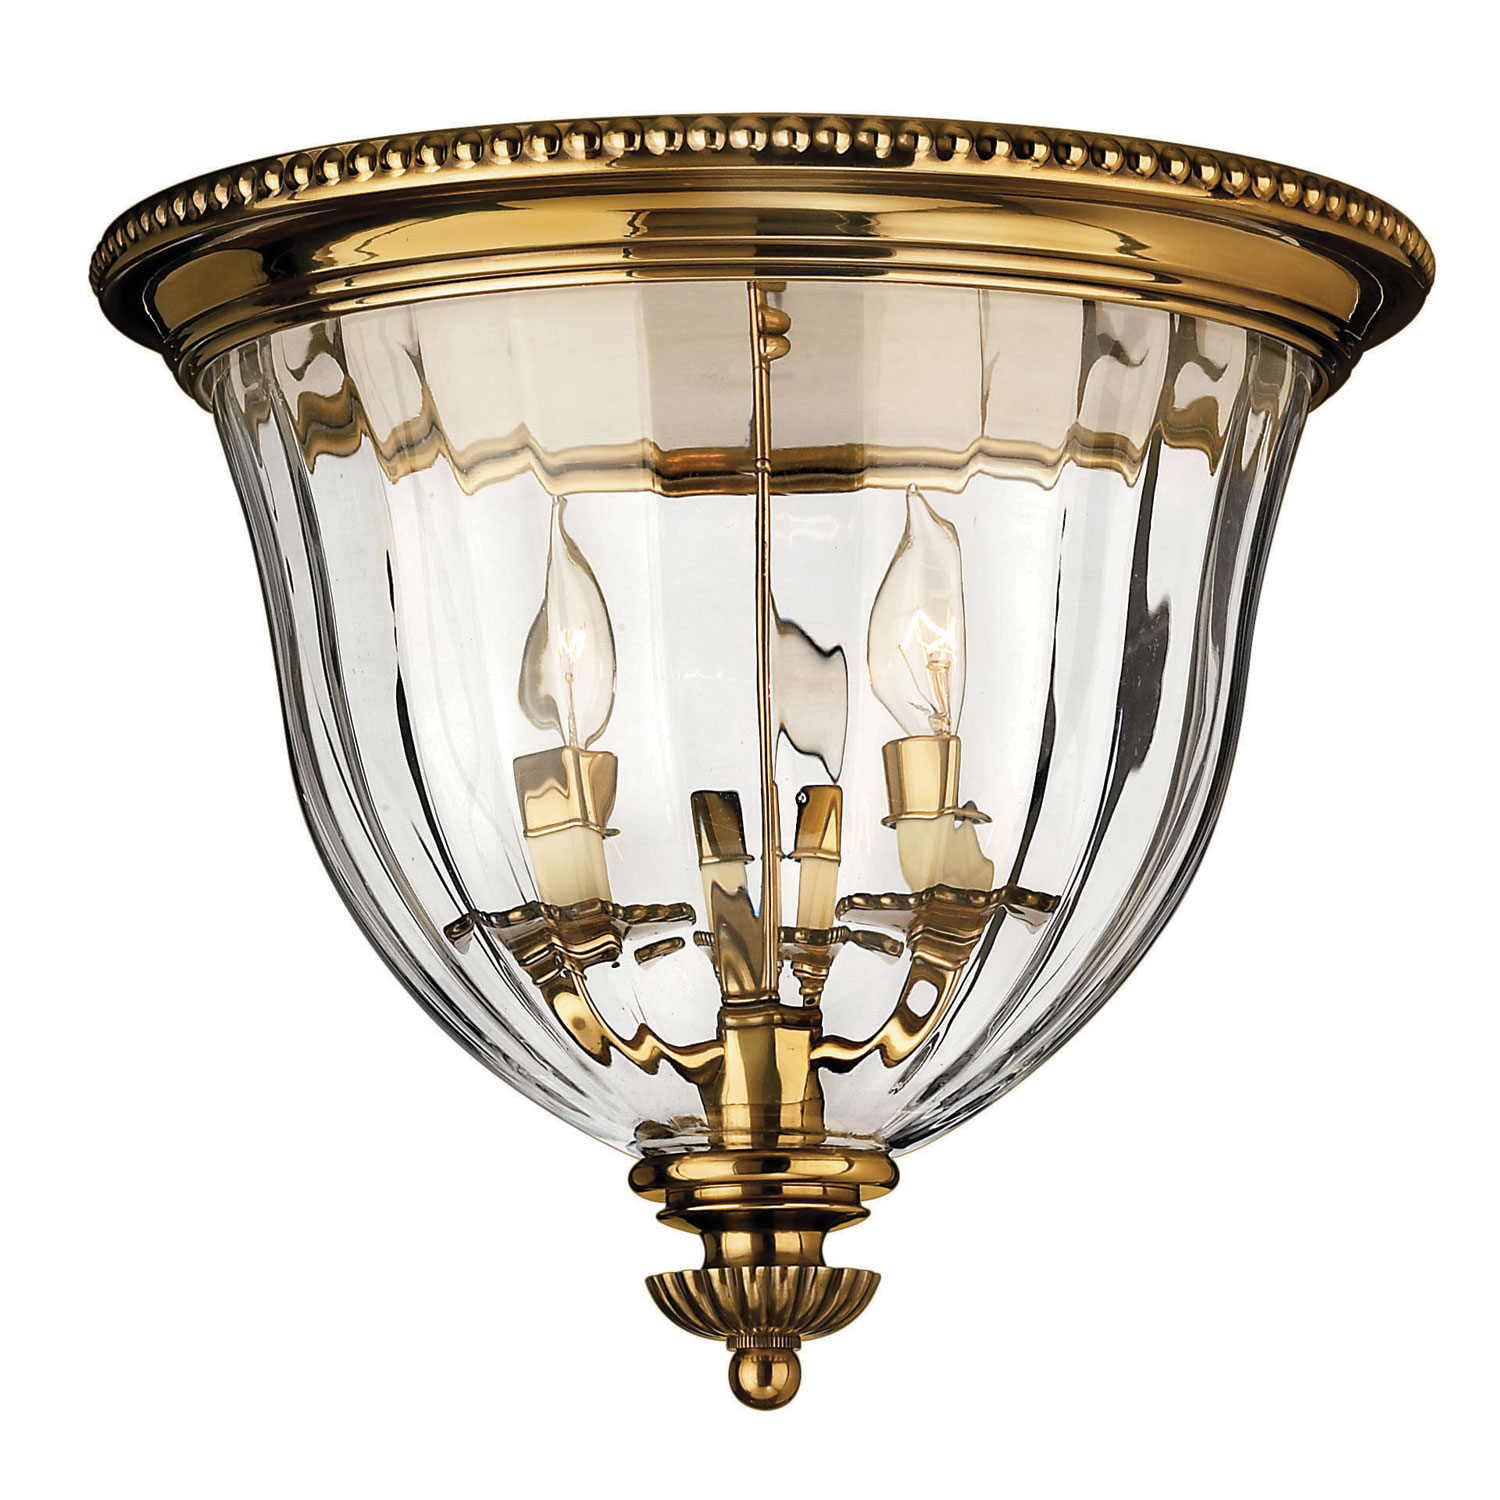 Oxford Small Burnished Brass Flush Mount Ceiling Light